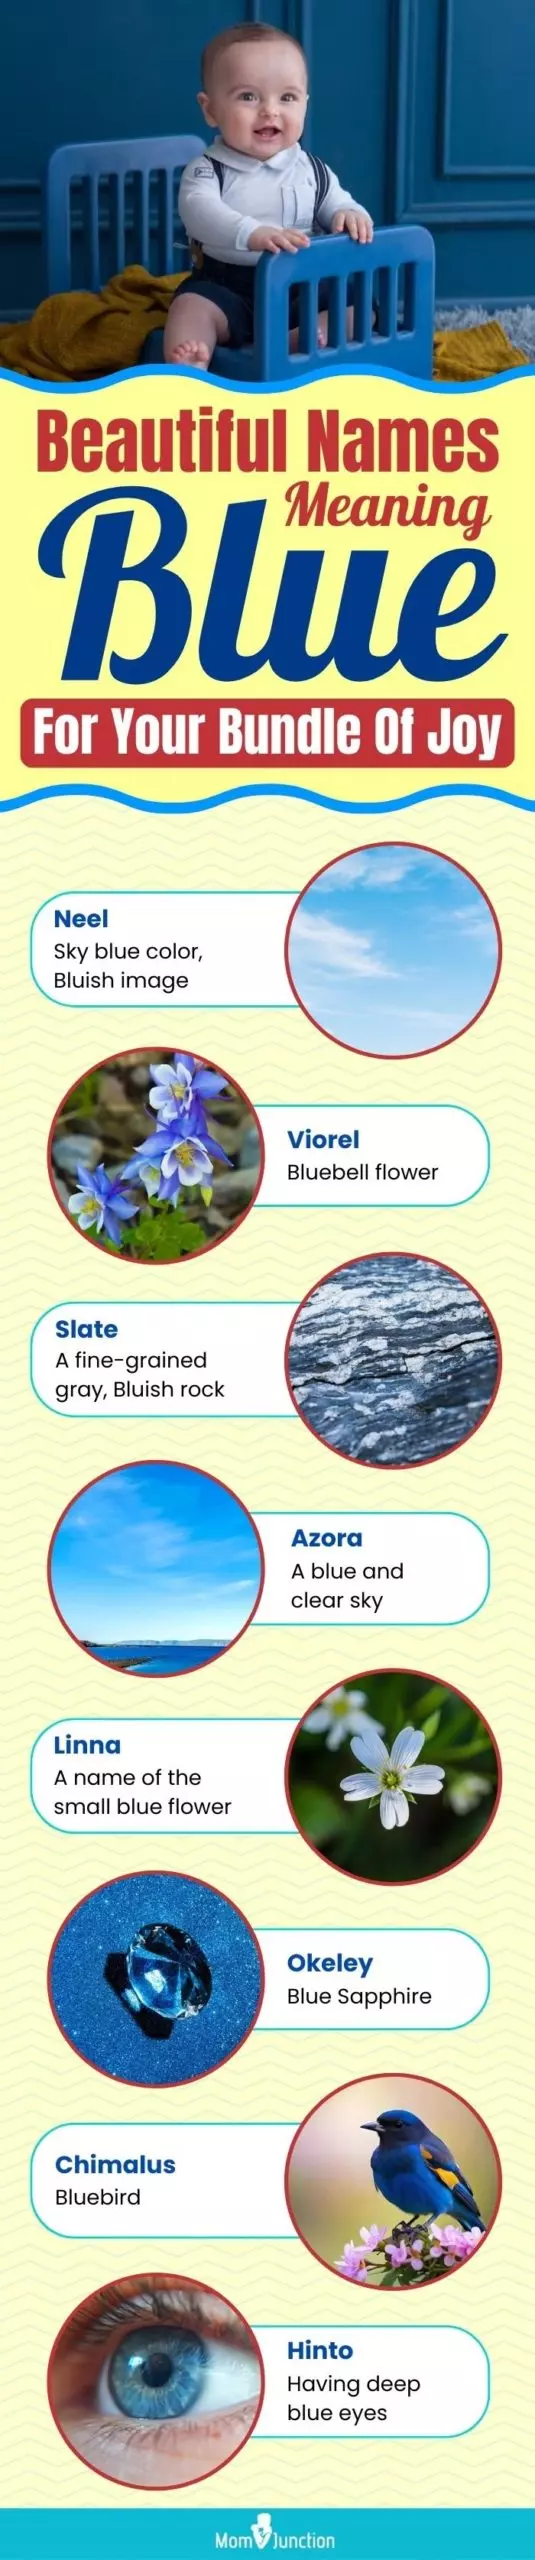 beautiful names meaning blue for your bundle of joy (infographic)